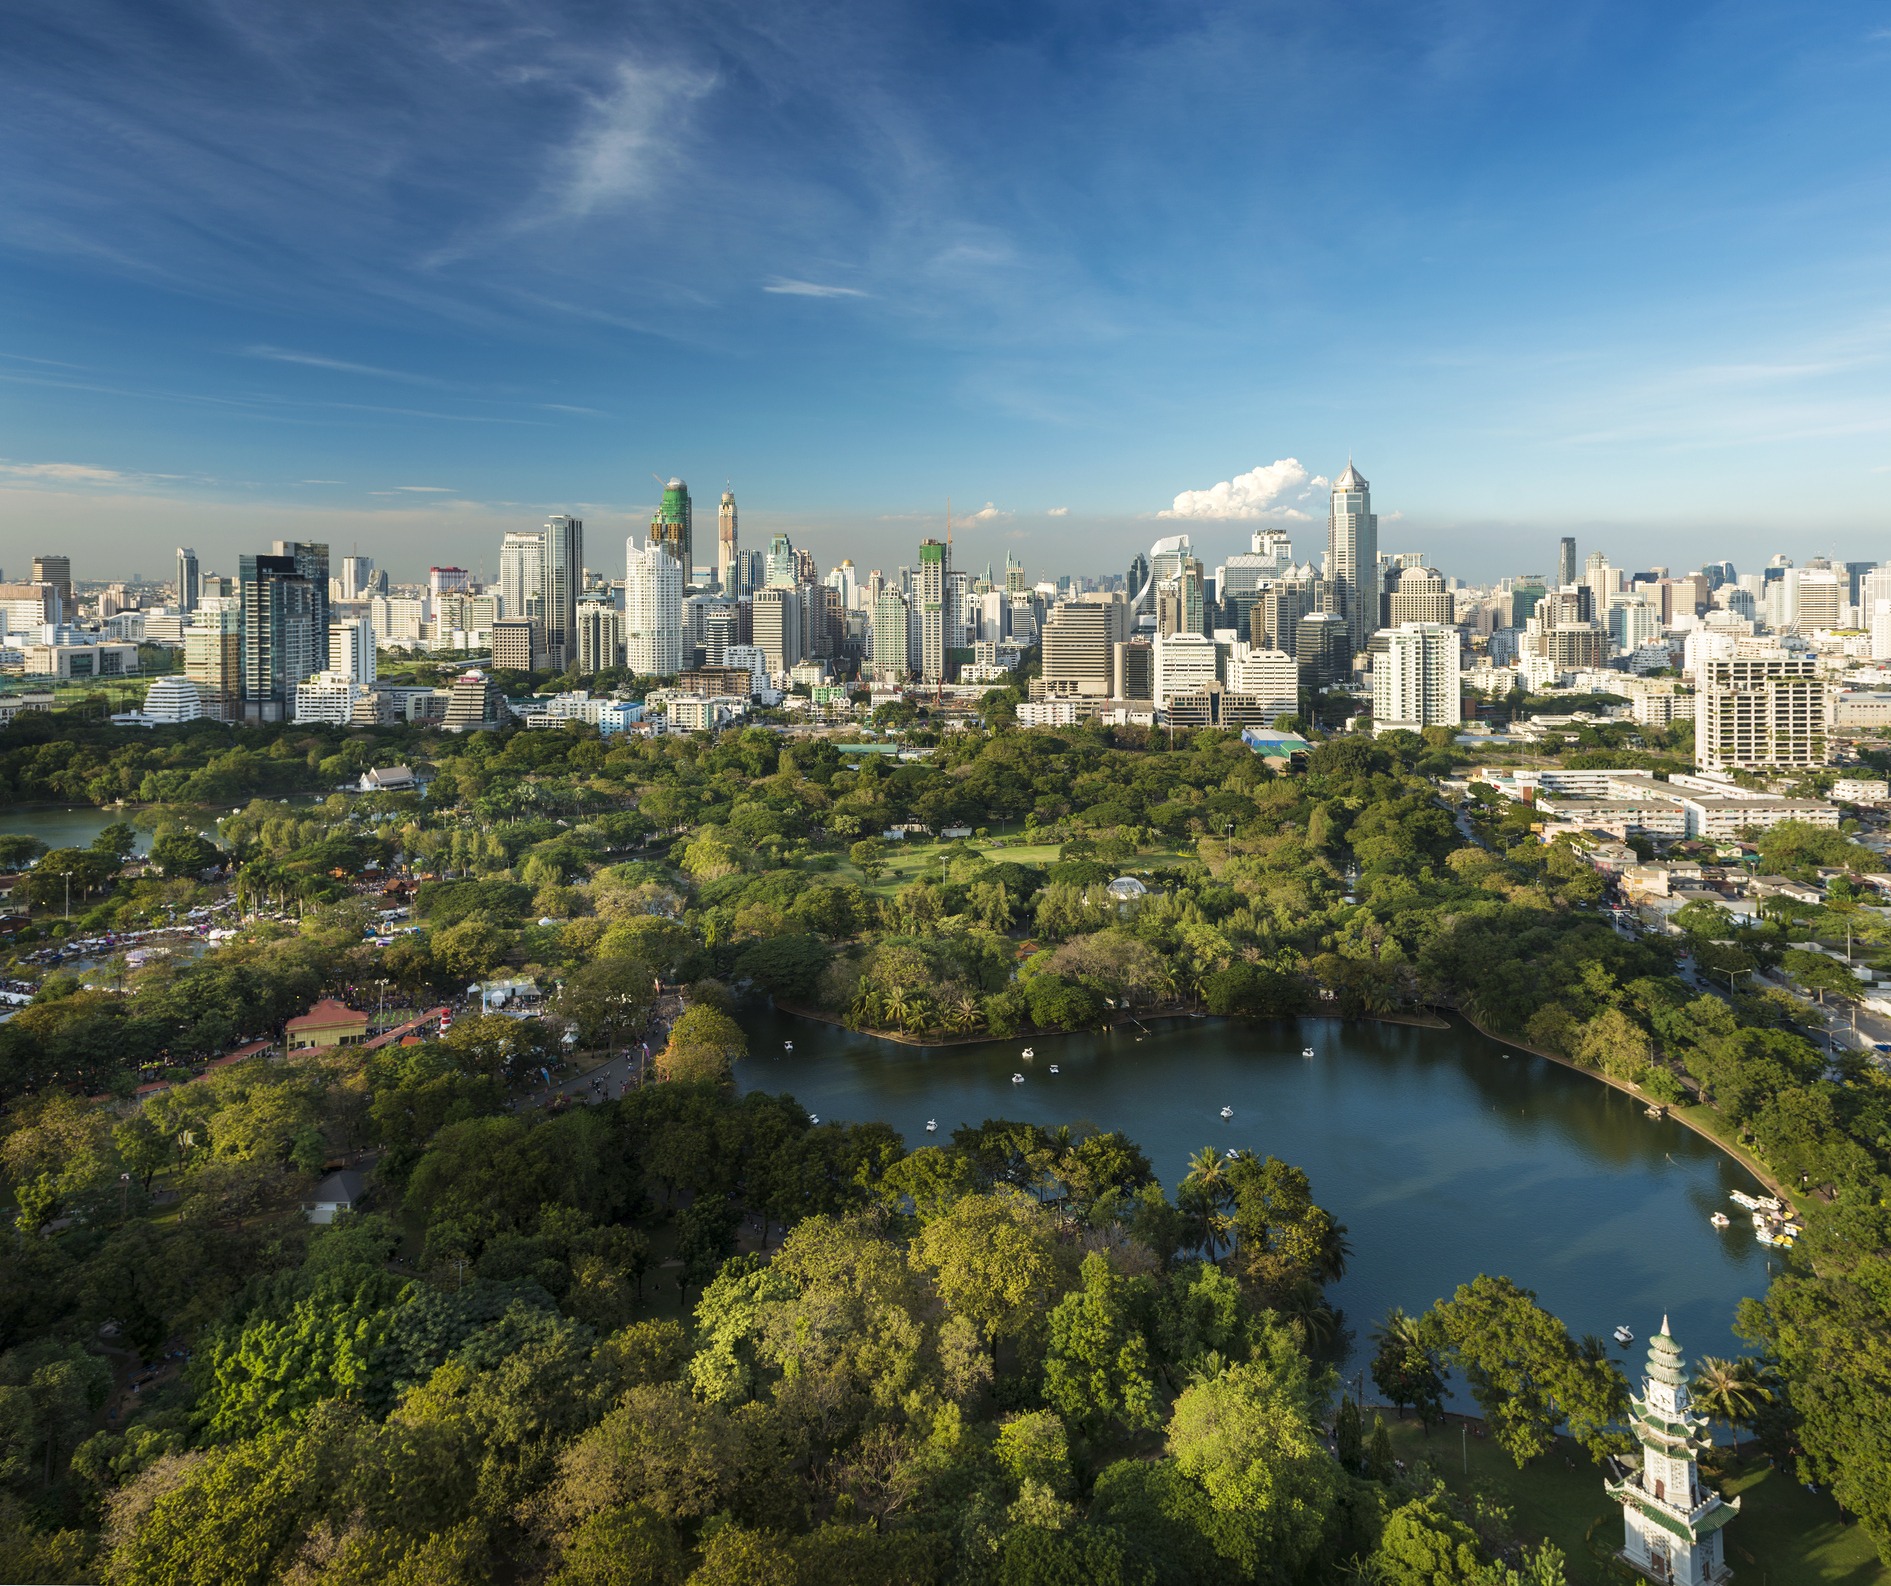 An aerial shot of the Bangkok skyline. The city sits behind a forest and lake.